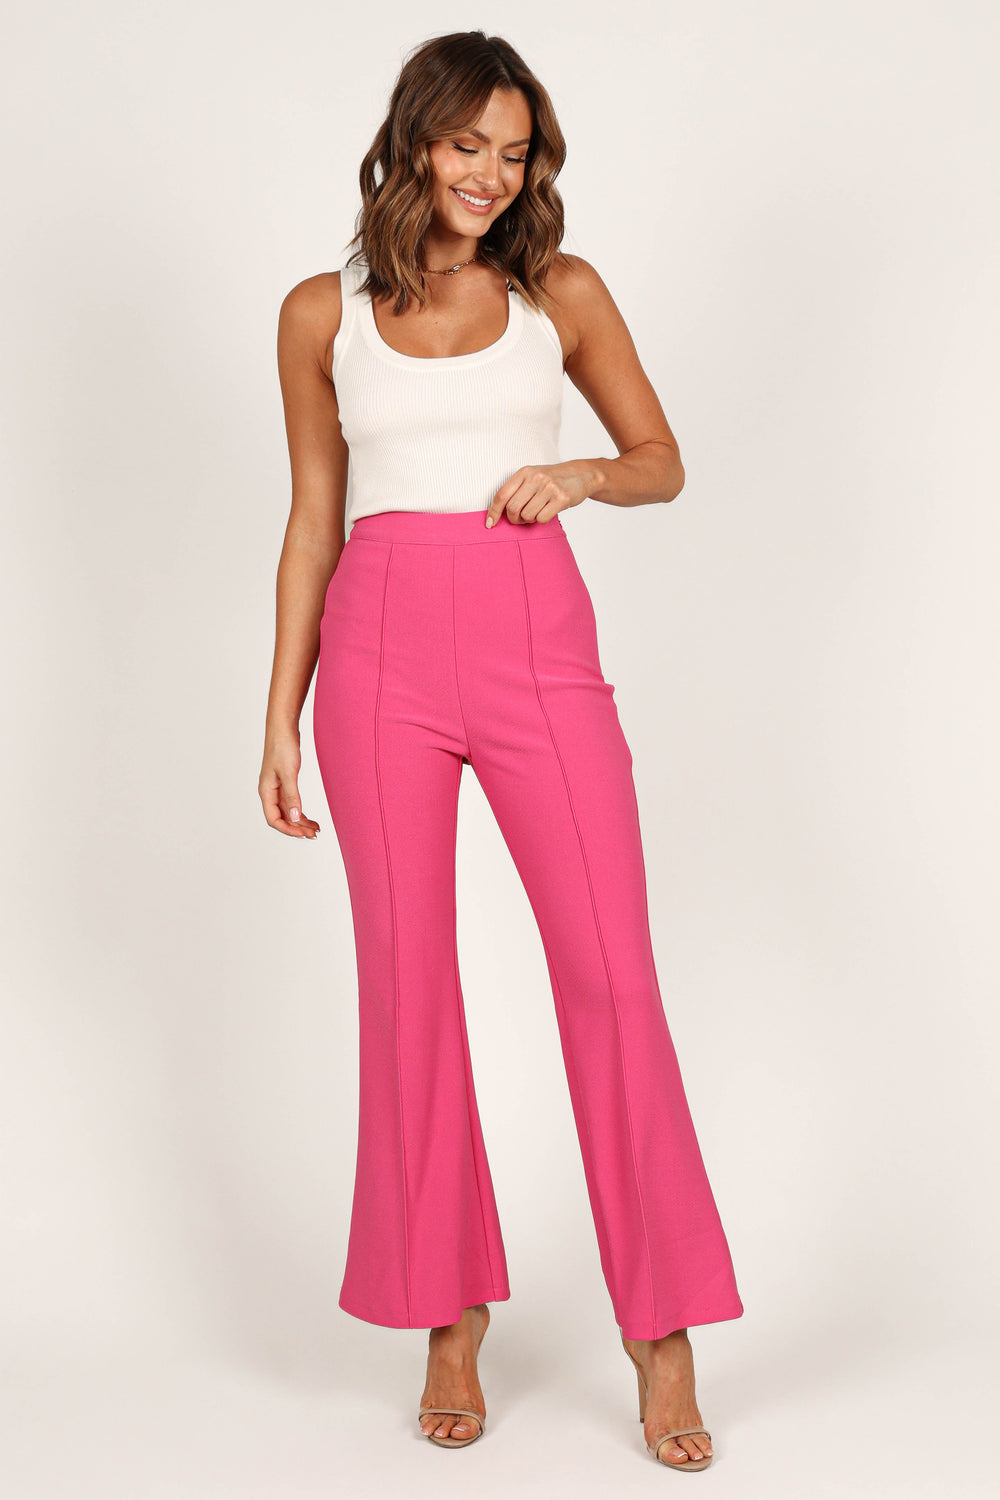 Alexander McQueen mid-rise Flared Trousers - Farfetch